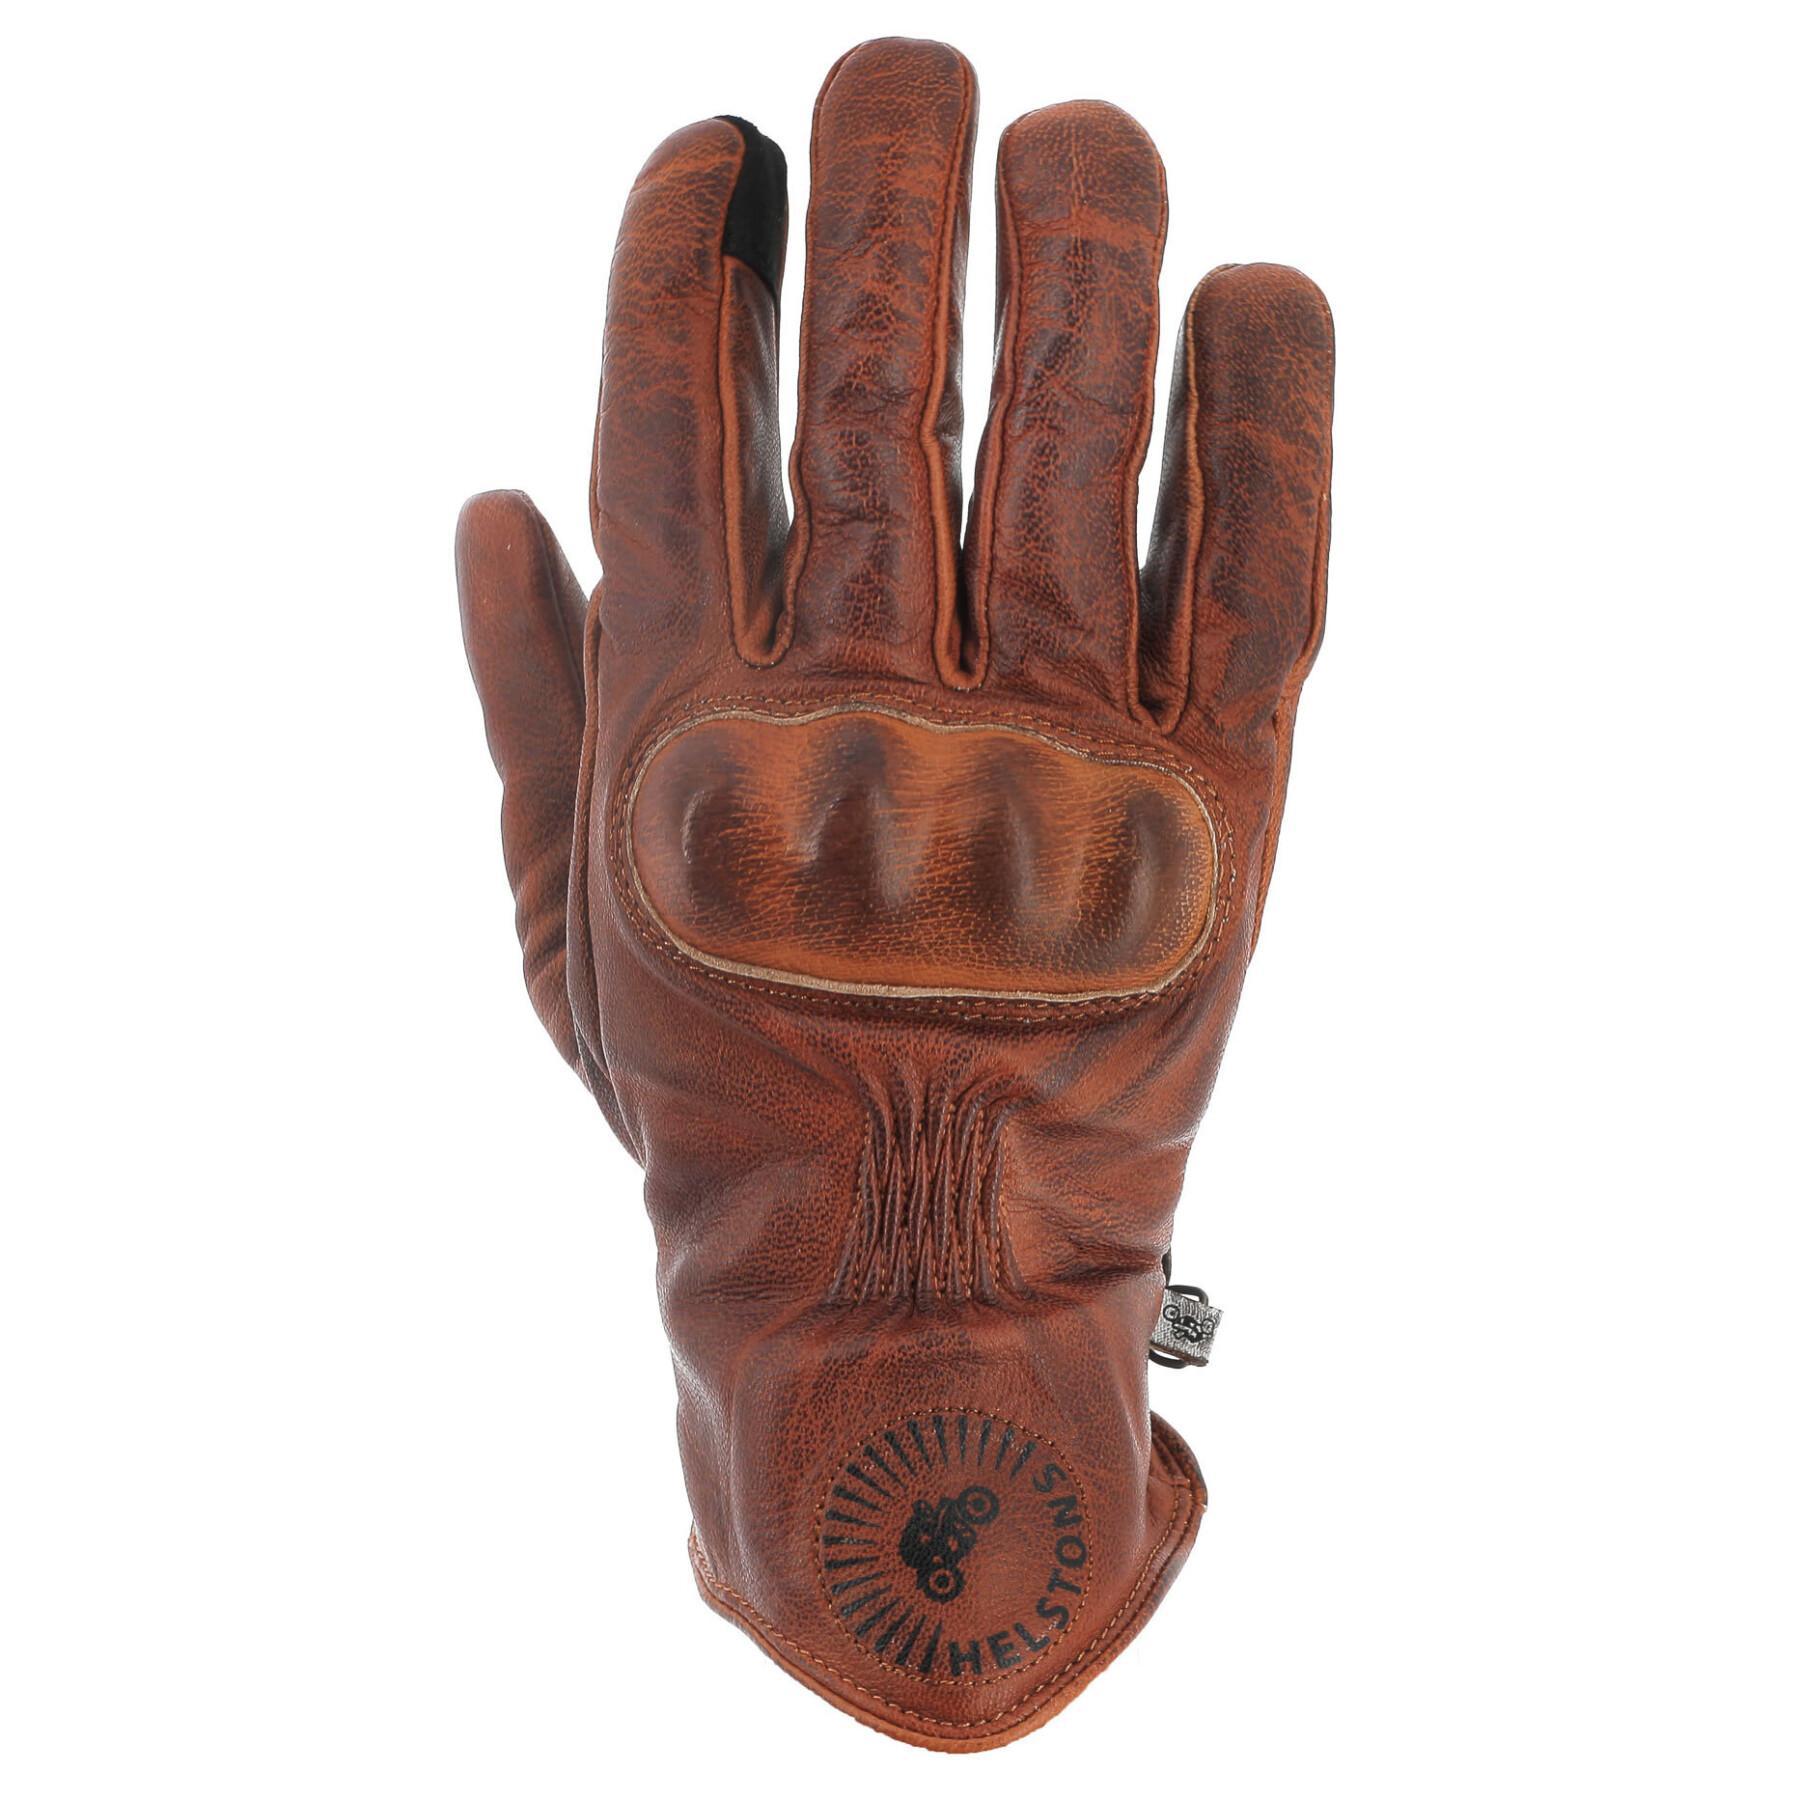 Winter leather motorcycle gloves Helstons Snow